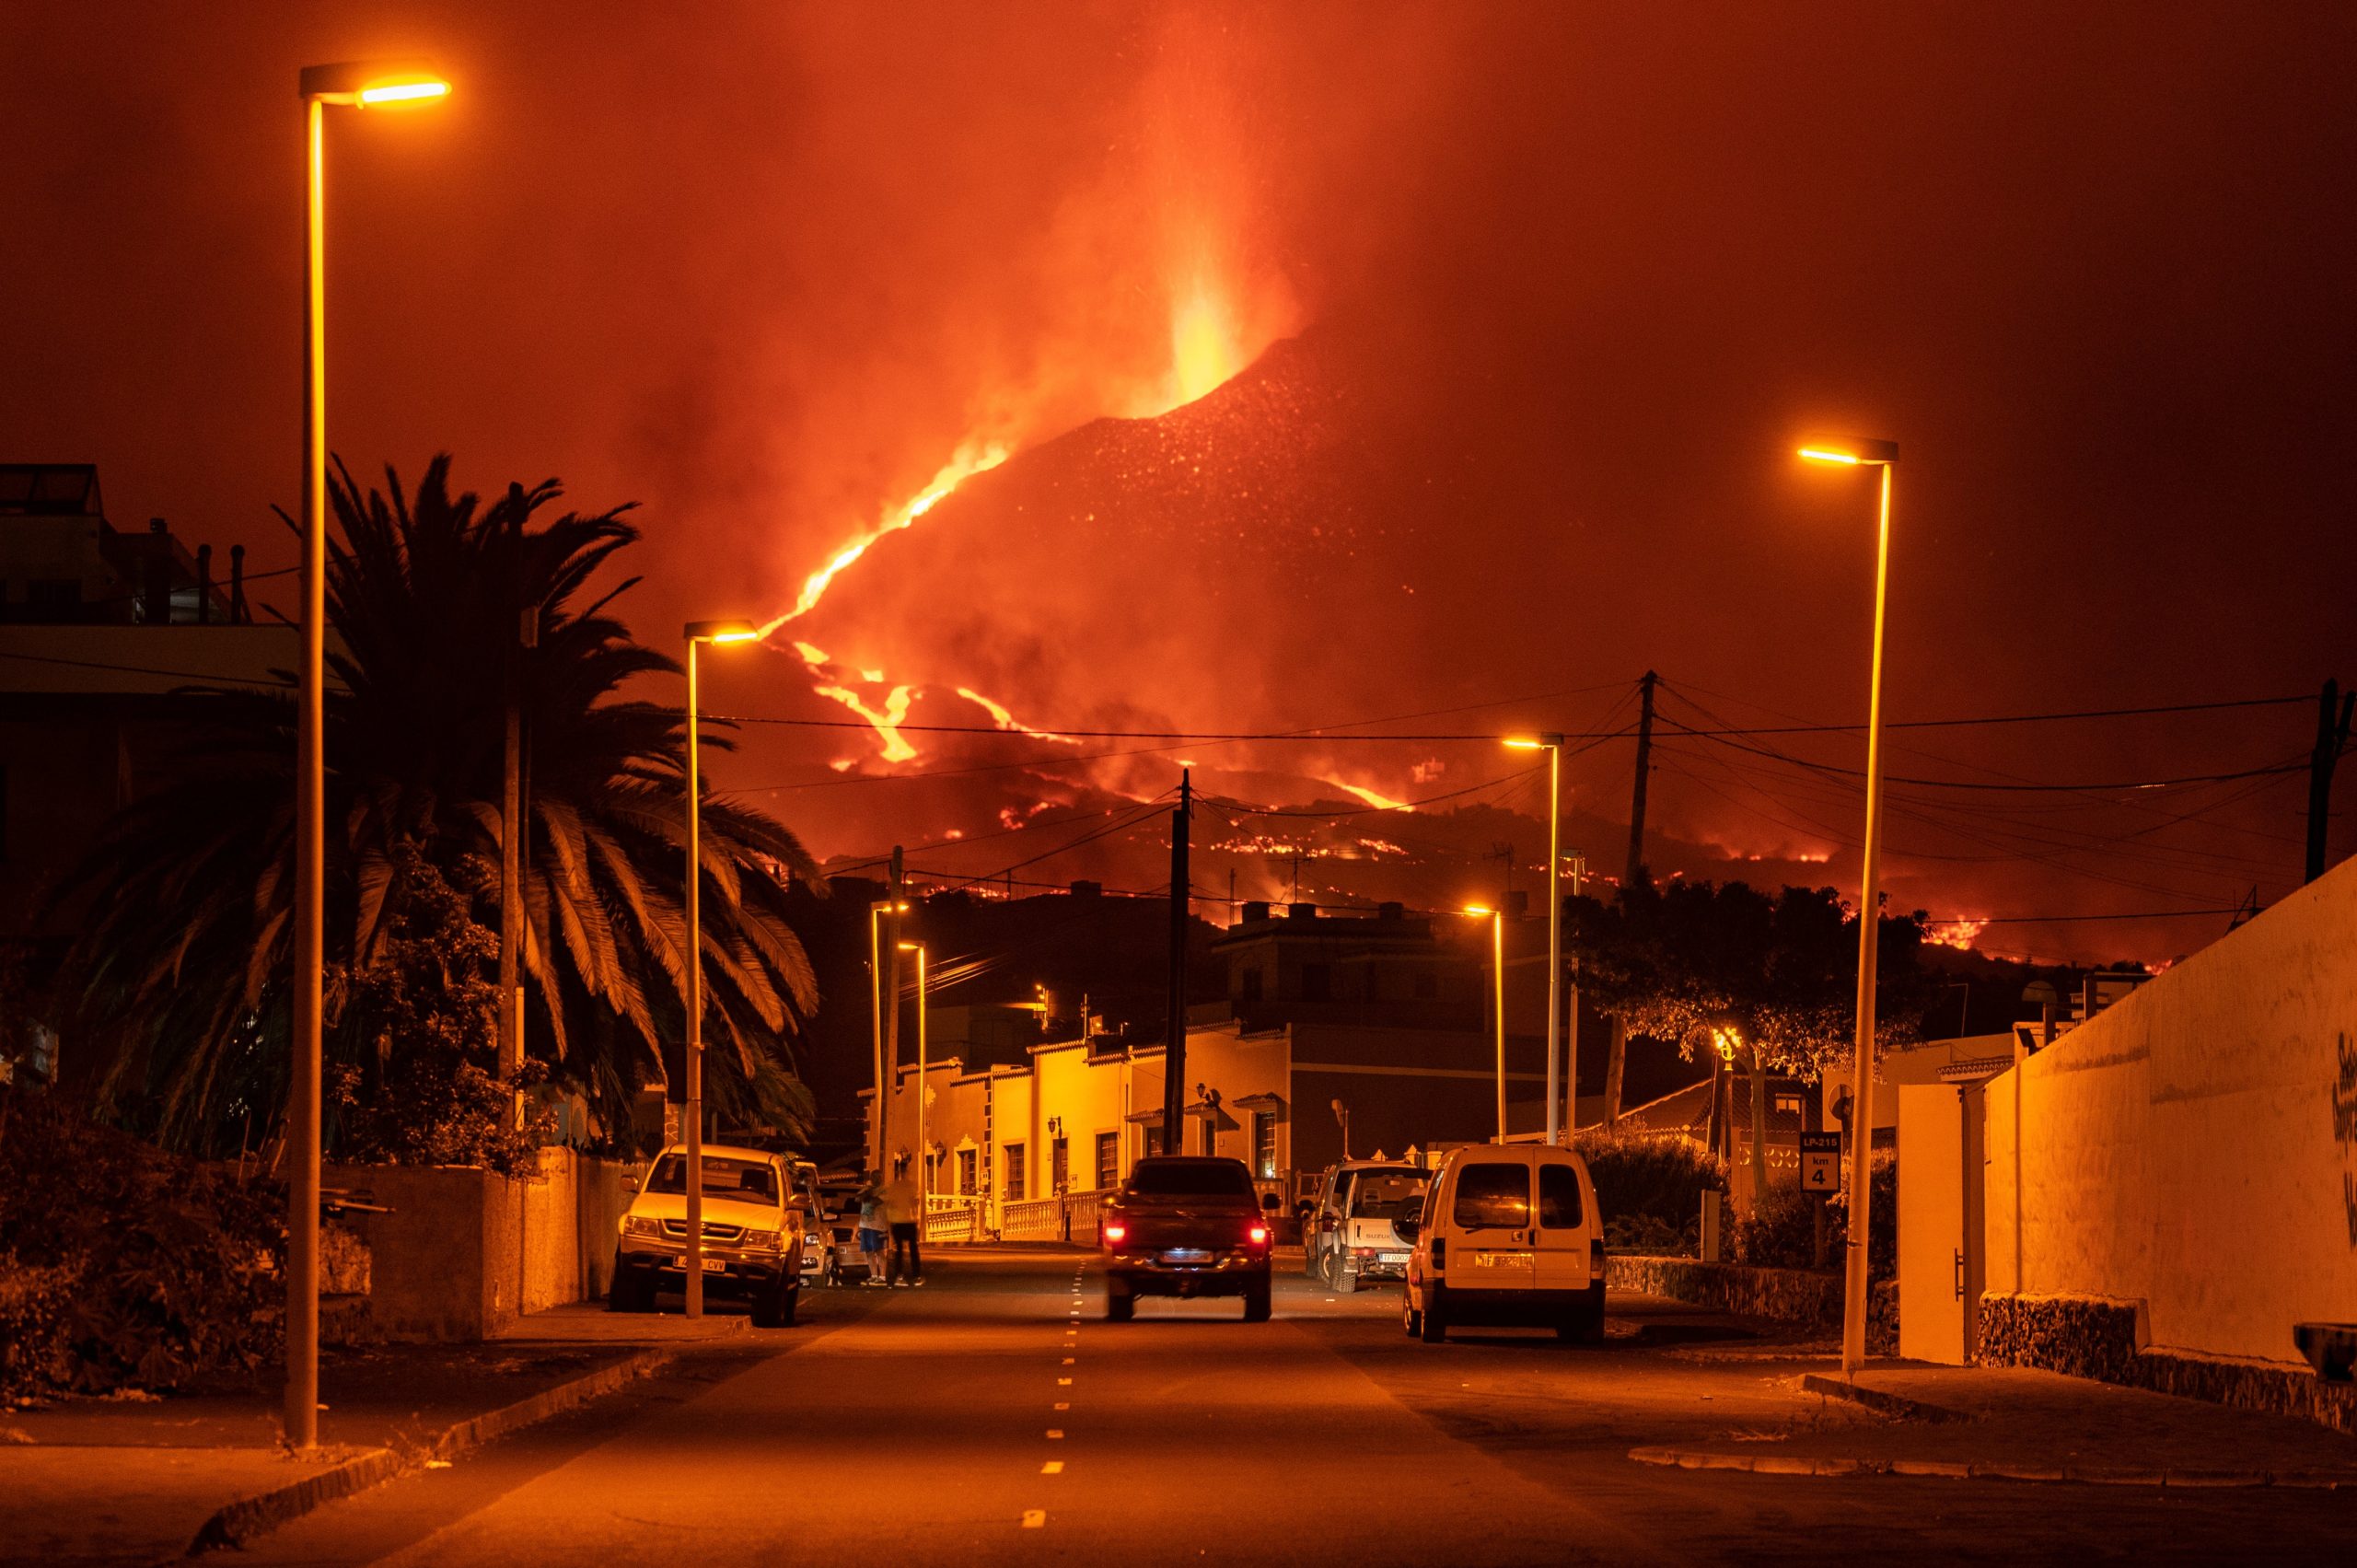 A car drives through an empty street in the neighbourhood of La Laguna as lava flows from the Cumbre Vieja Volcano on October 9, 2021 in La Palma, Spain. (Photo: Marcos del Mazo, Getty Images)